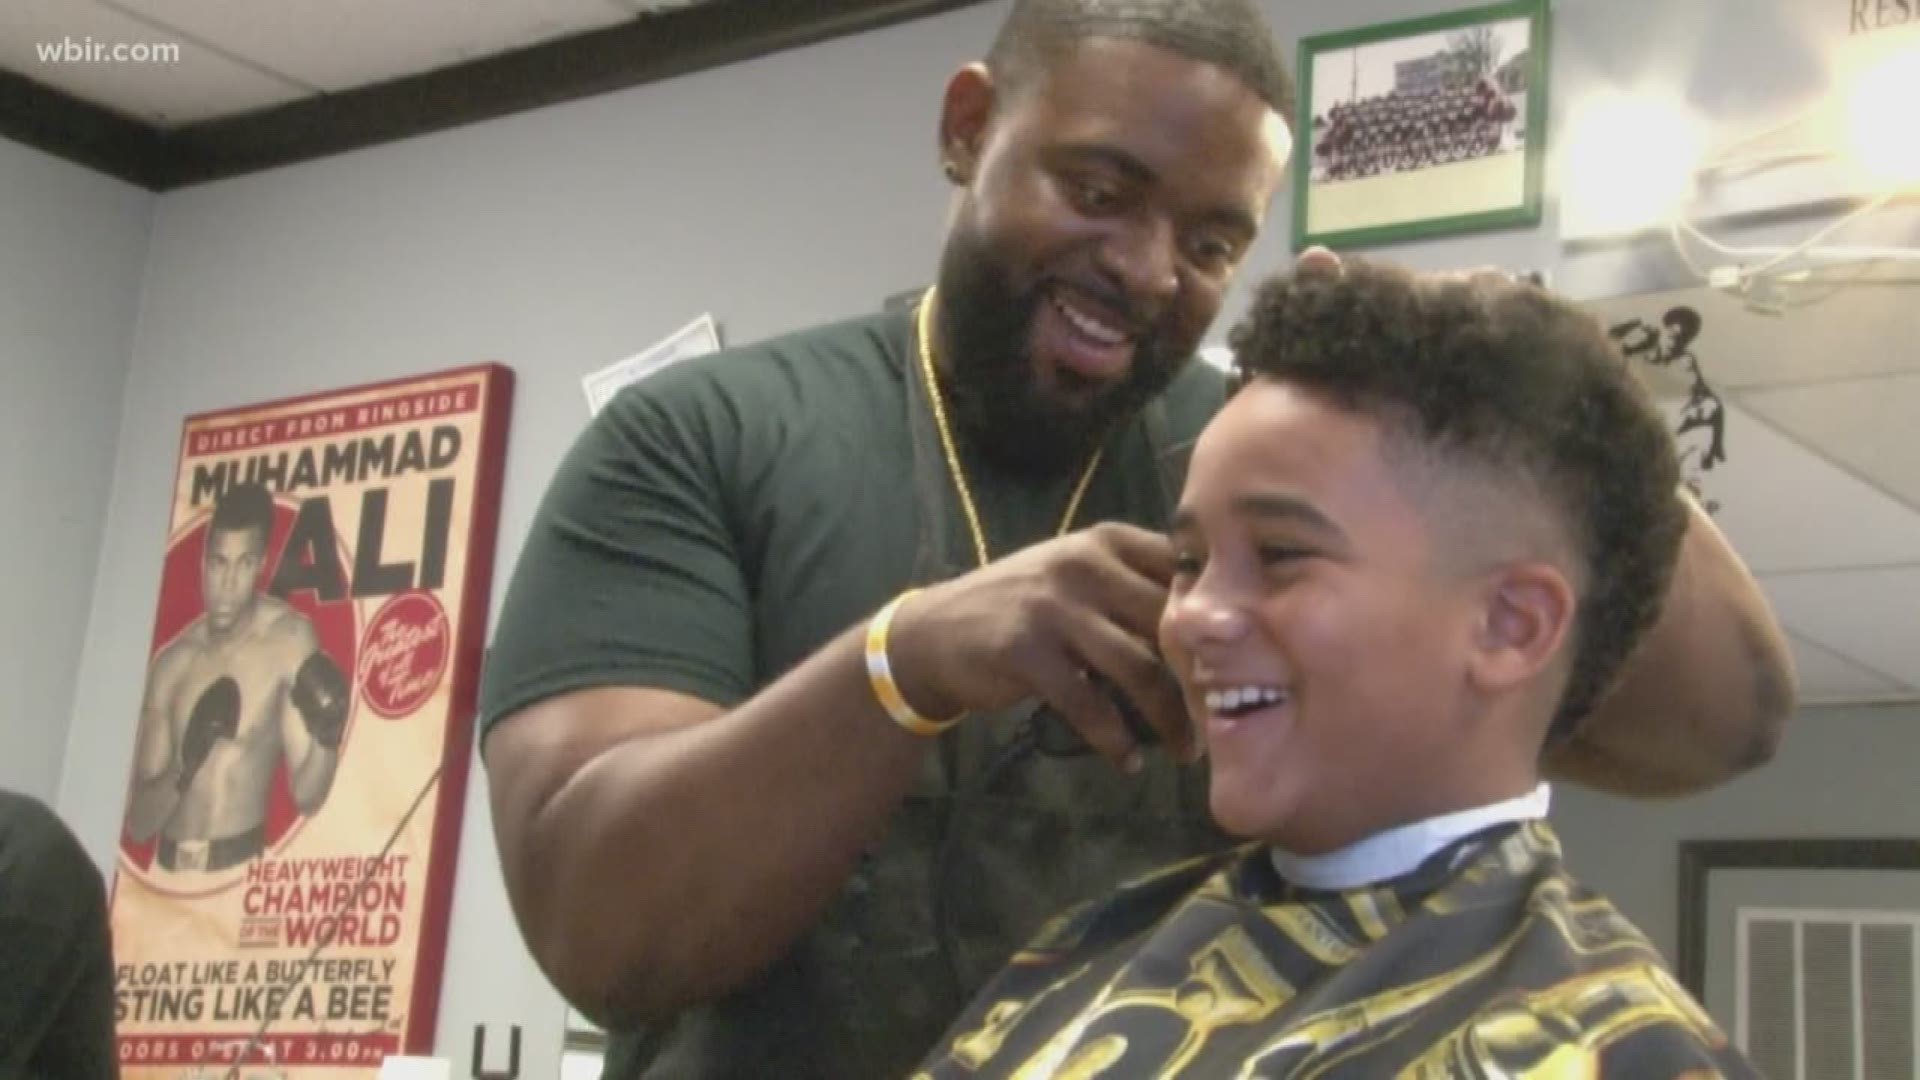 Oak Valley Baptist Church partnered with local barbers on Sunday afternoon to provide free haircuts for students heading back to school in the next few weeks.